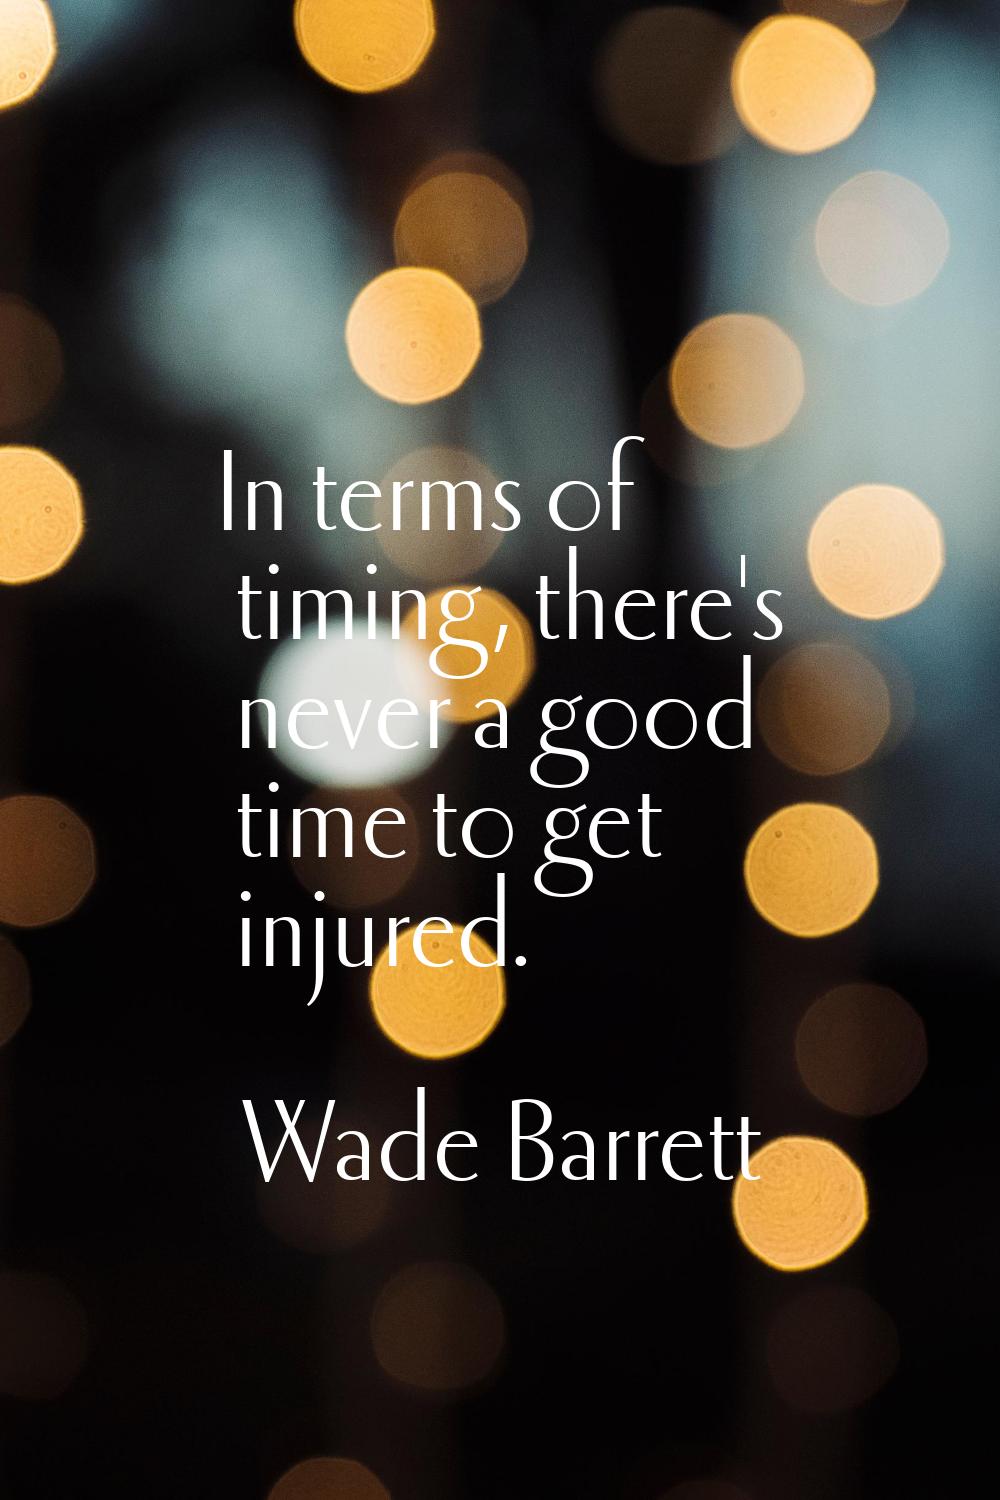 In terms of timing, there's never a good time to get injured.